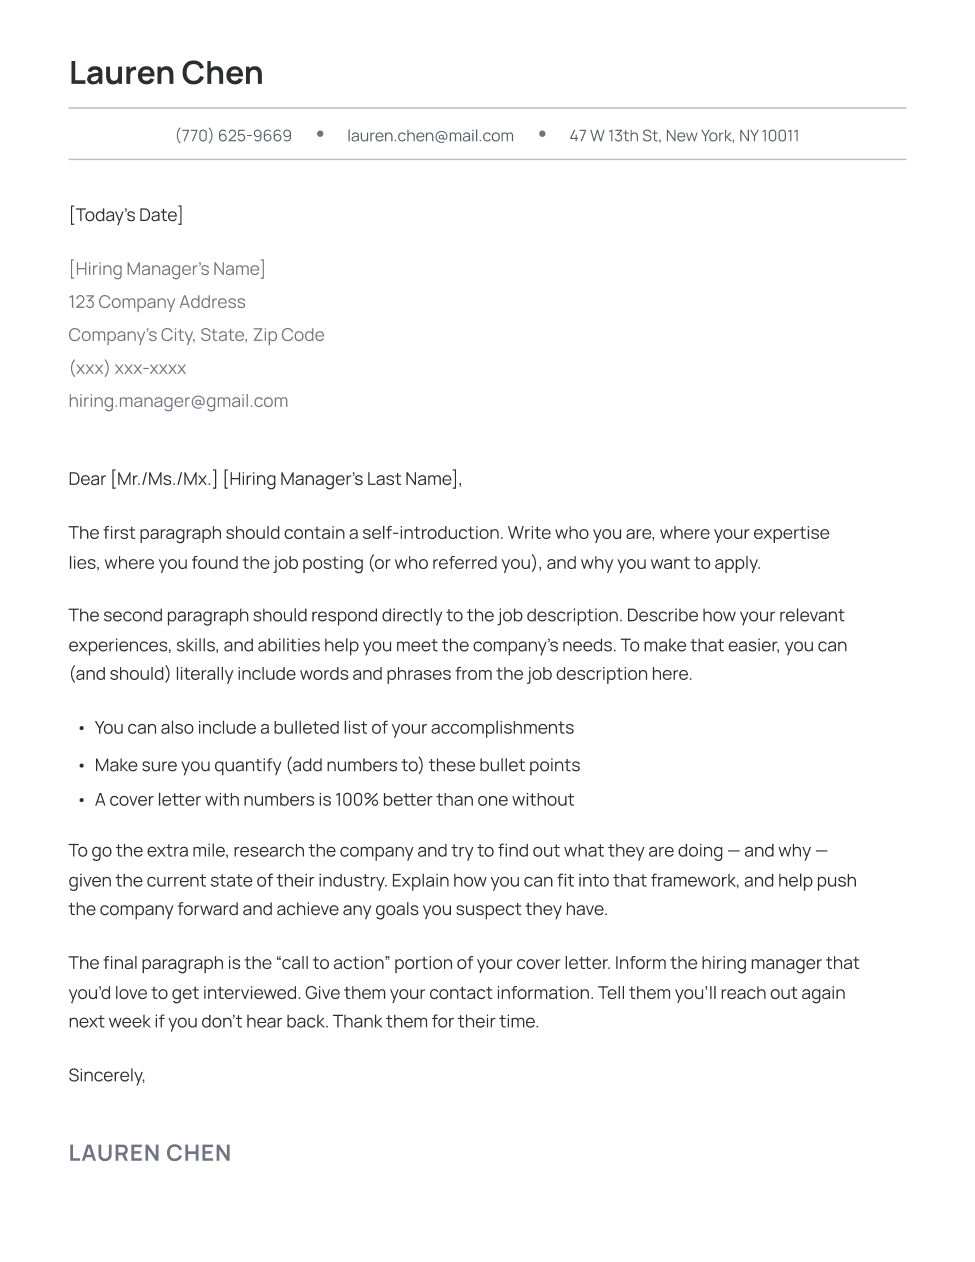 Modern cover letter template in gray, featuring a minimalist design.